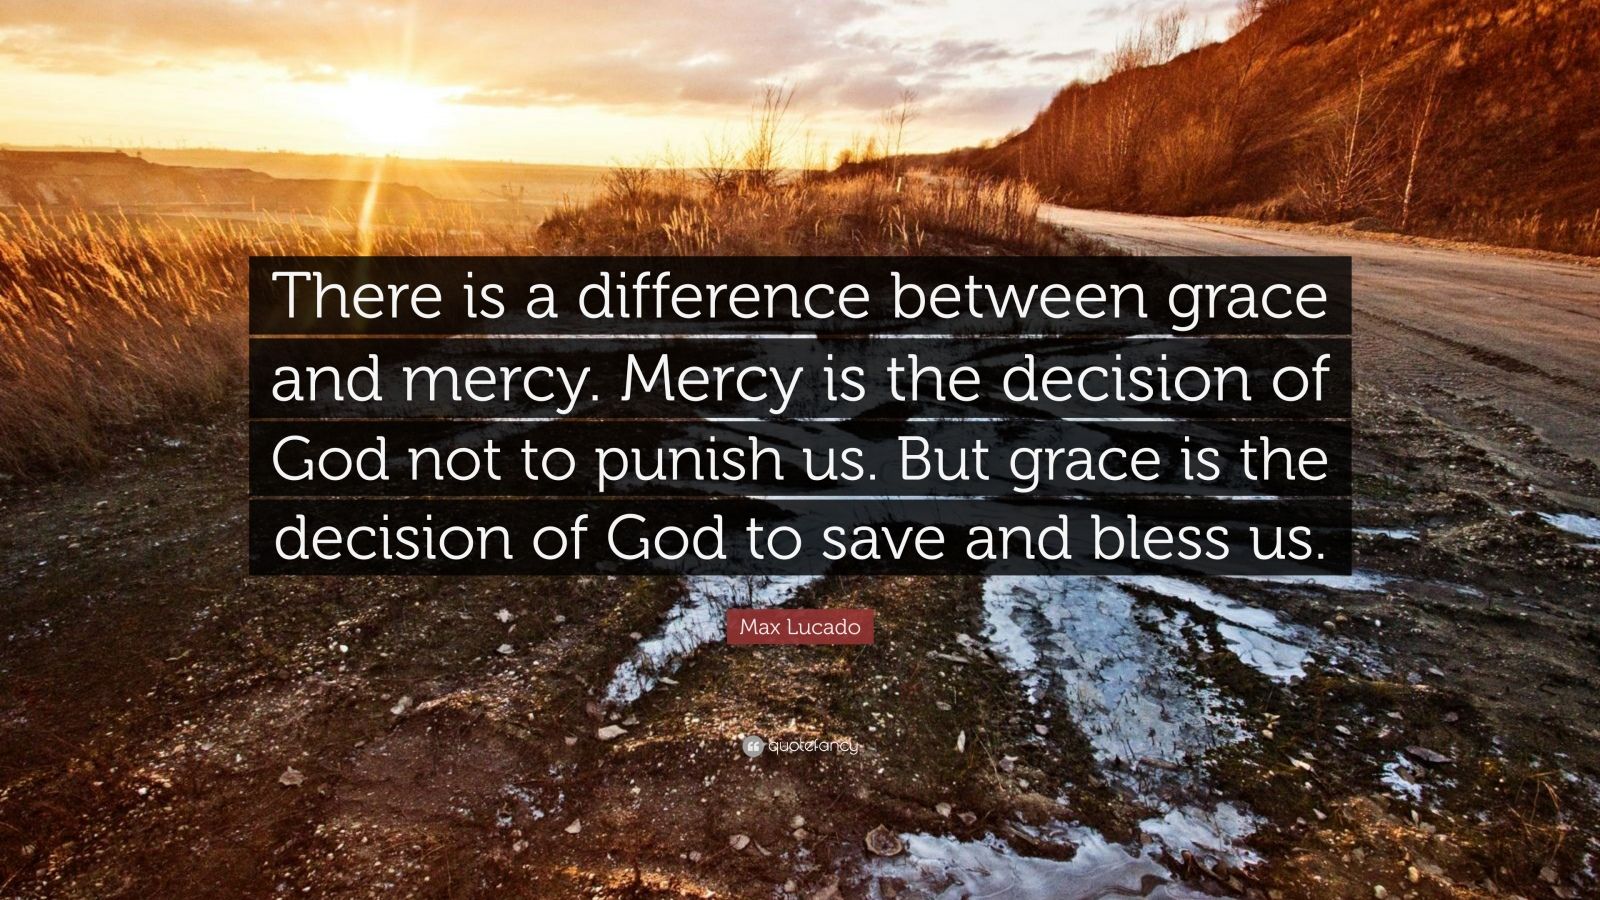 1888141 Max Lucado Quote There is a difference between grace and mercy